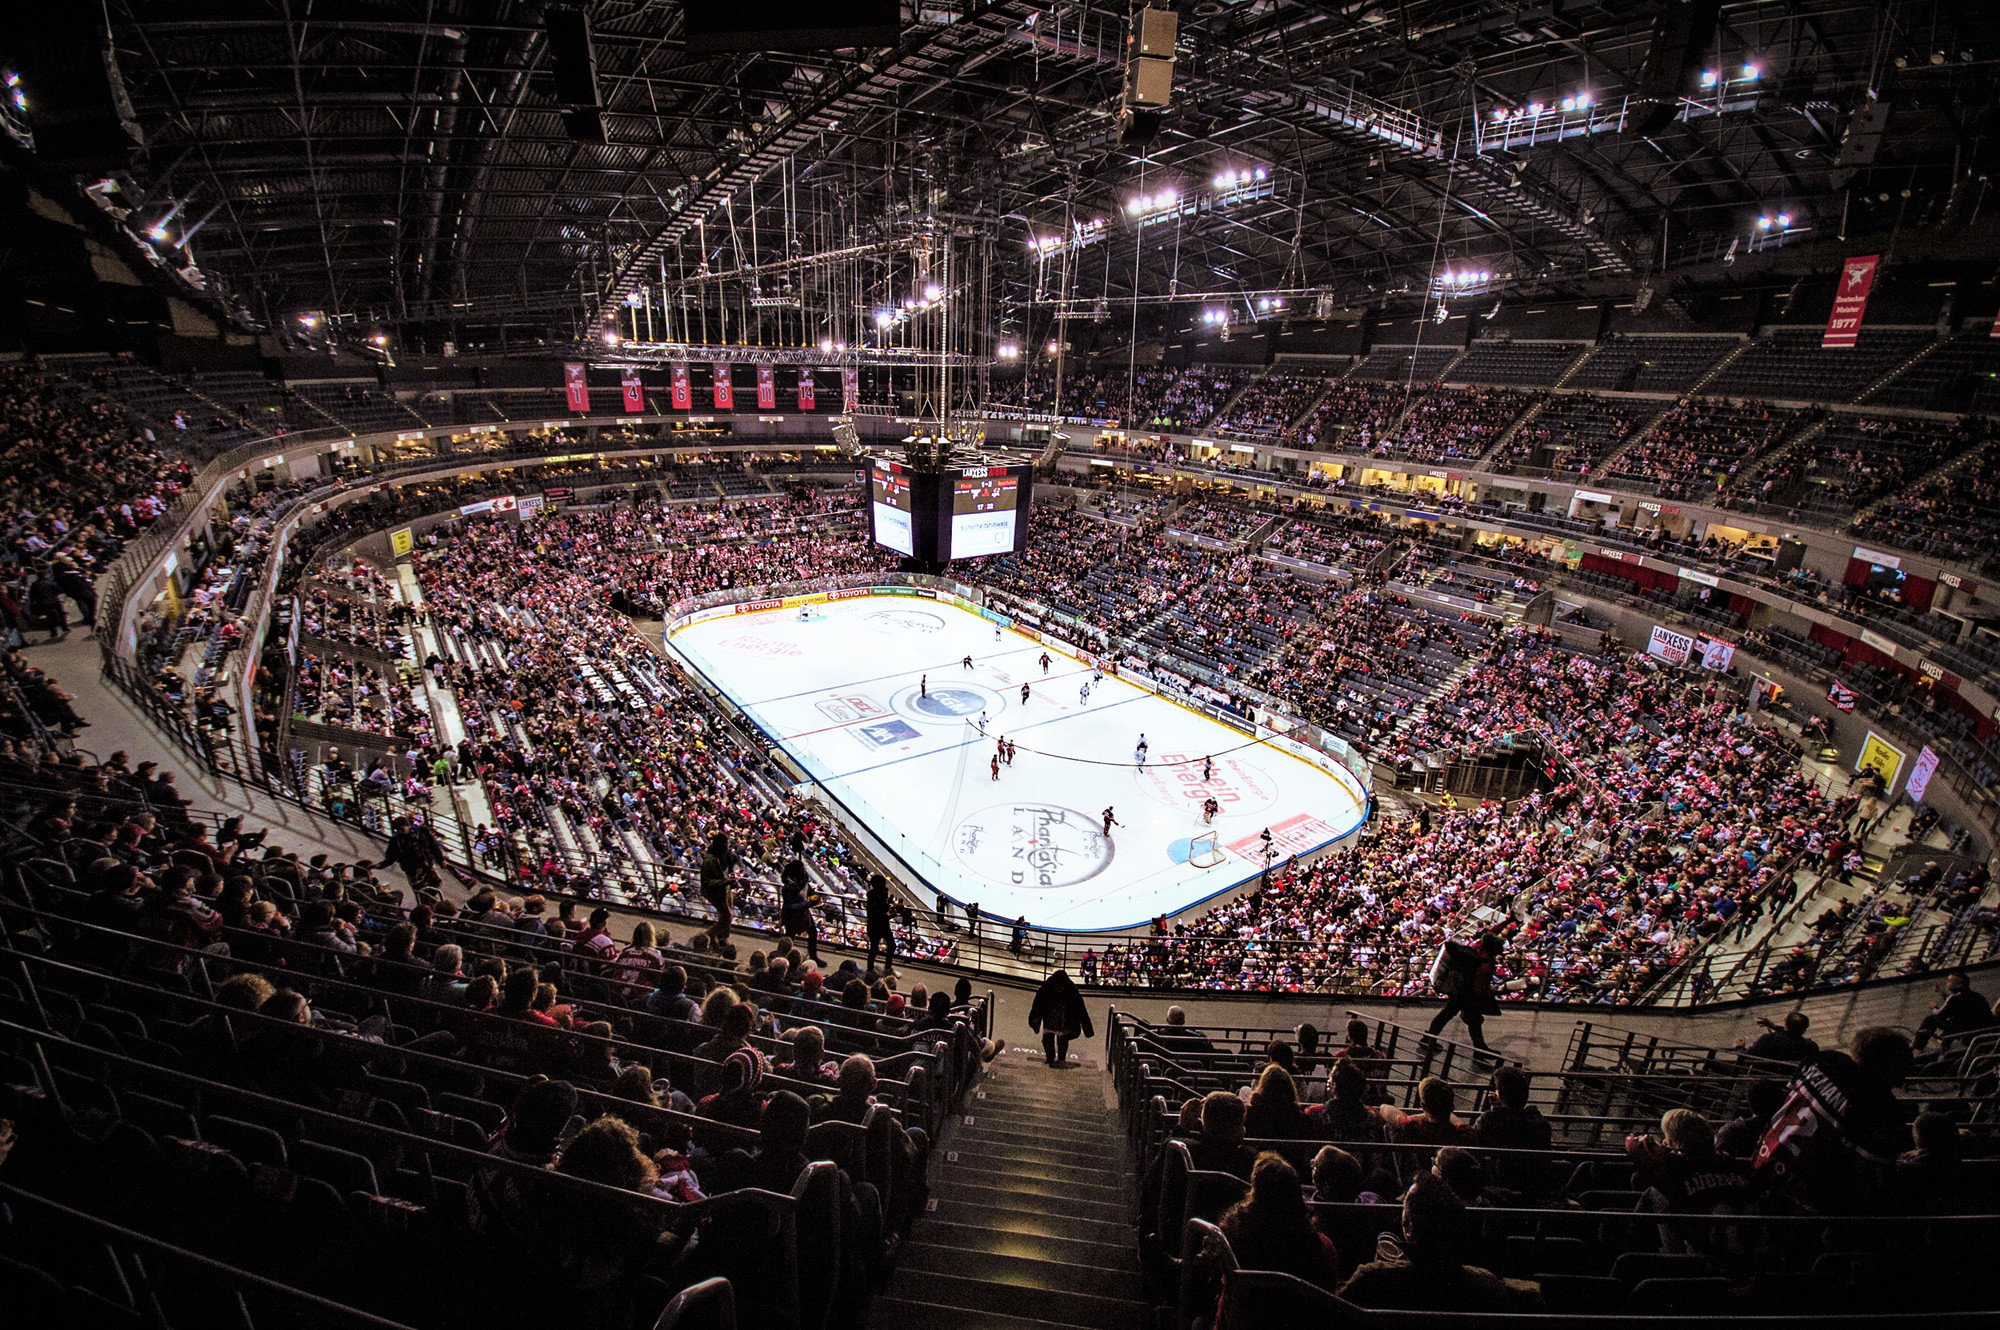 Lanxess Arena: Germany's largest multifunctional venue